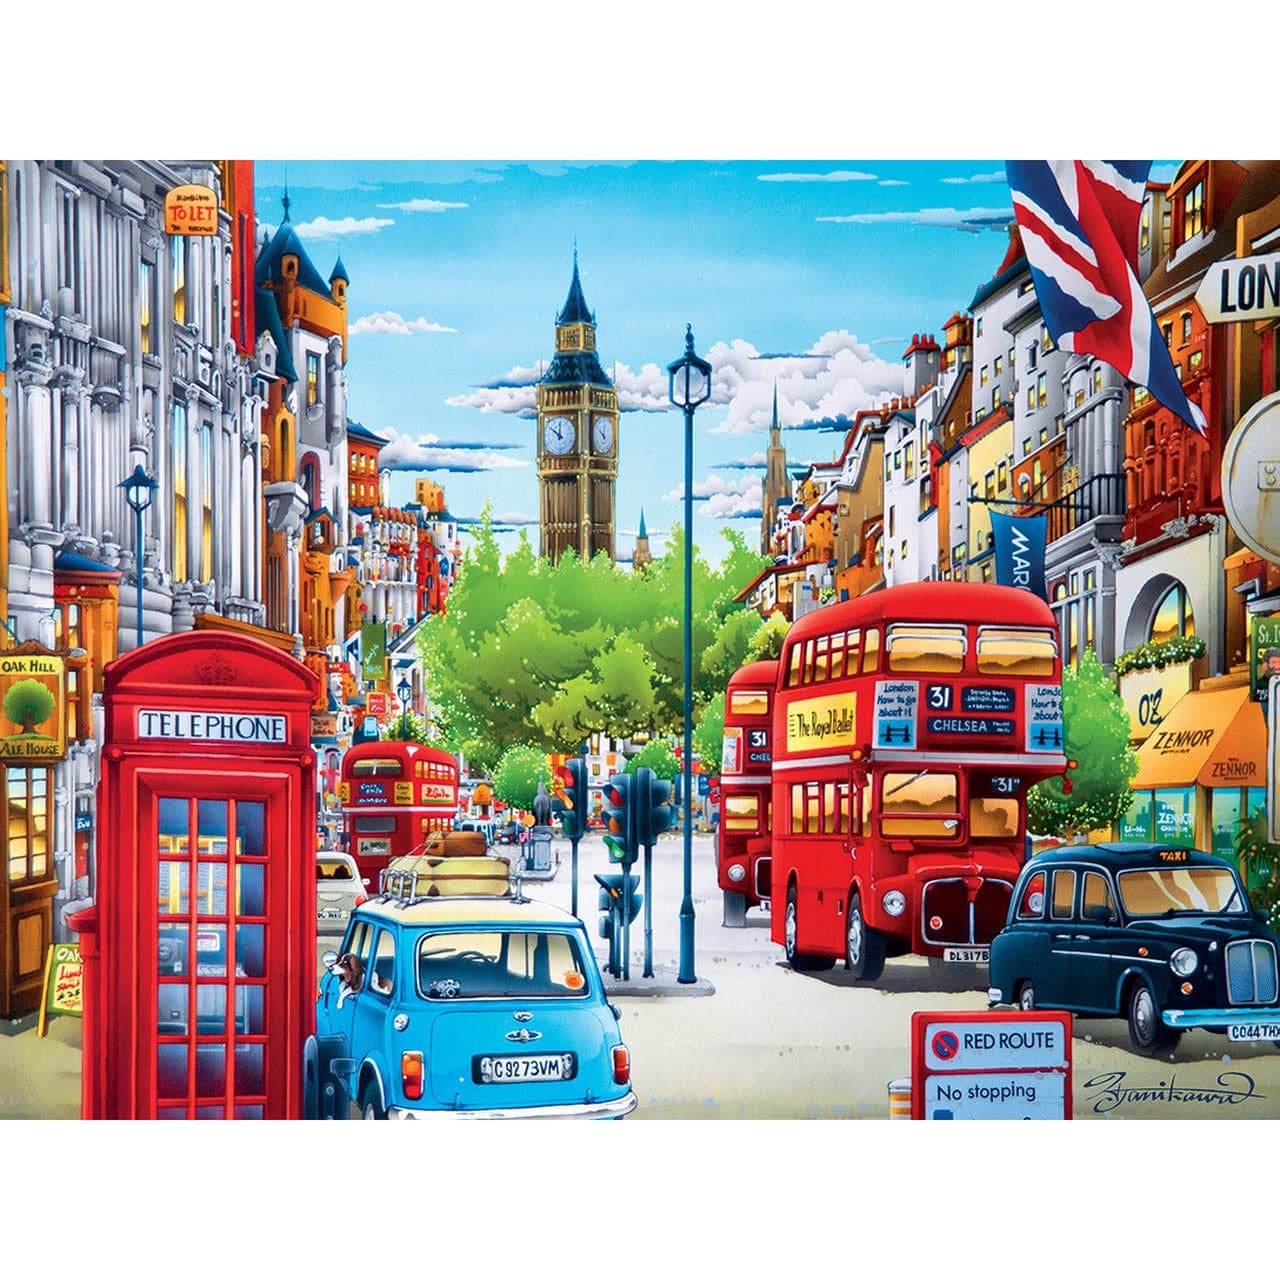 MasterPieces-Travel Diary - London - 550 Piece Puzzle-31973-Legacy Toys